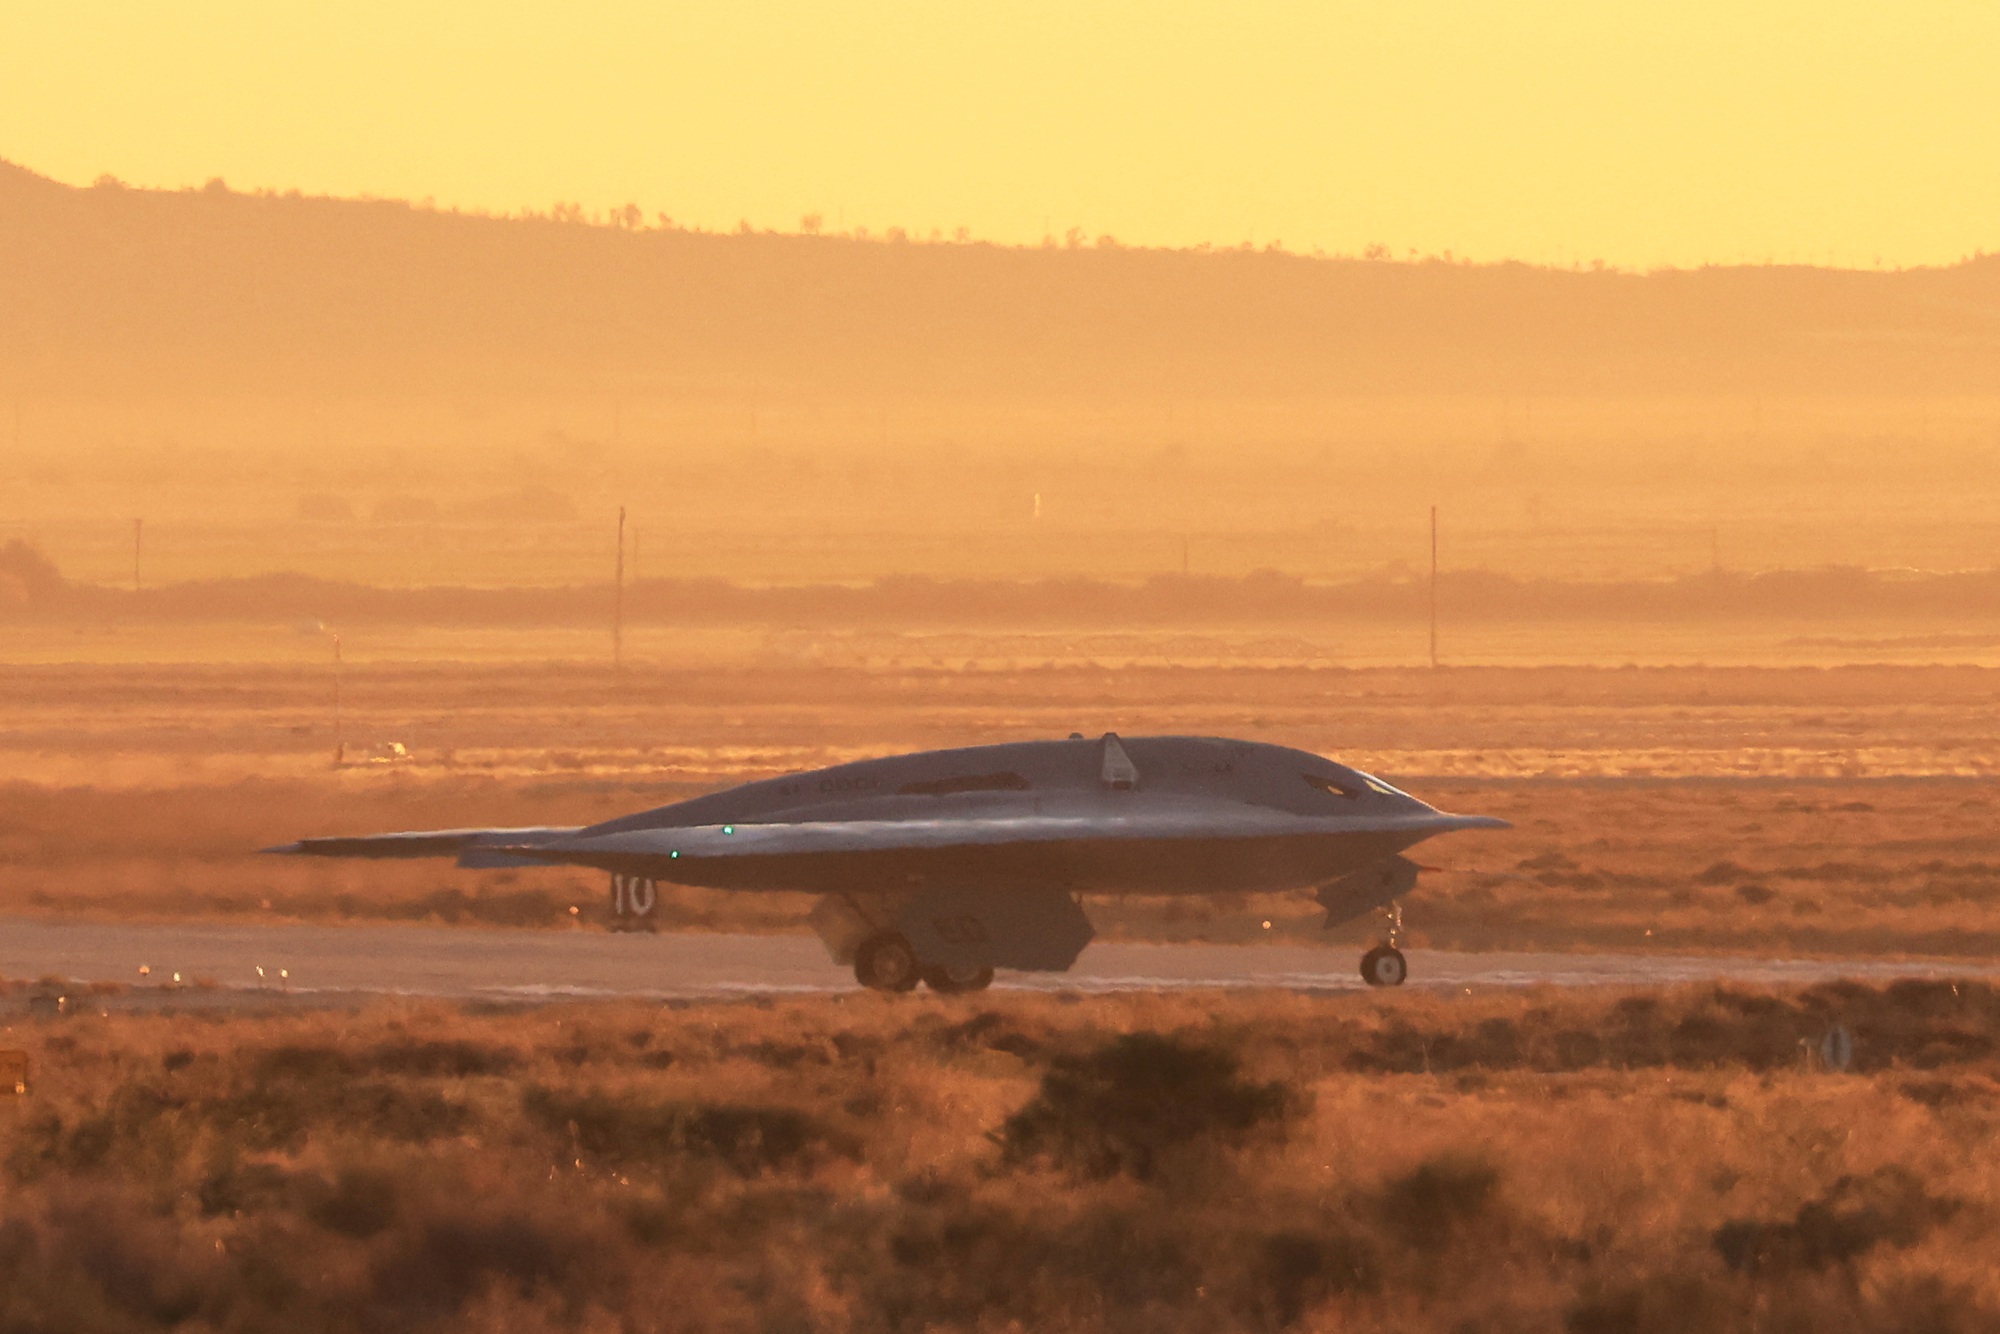 The American super nuclear bomber flew for the first time - photo 2.